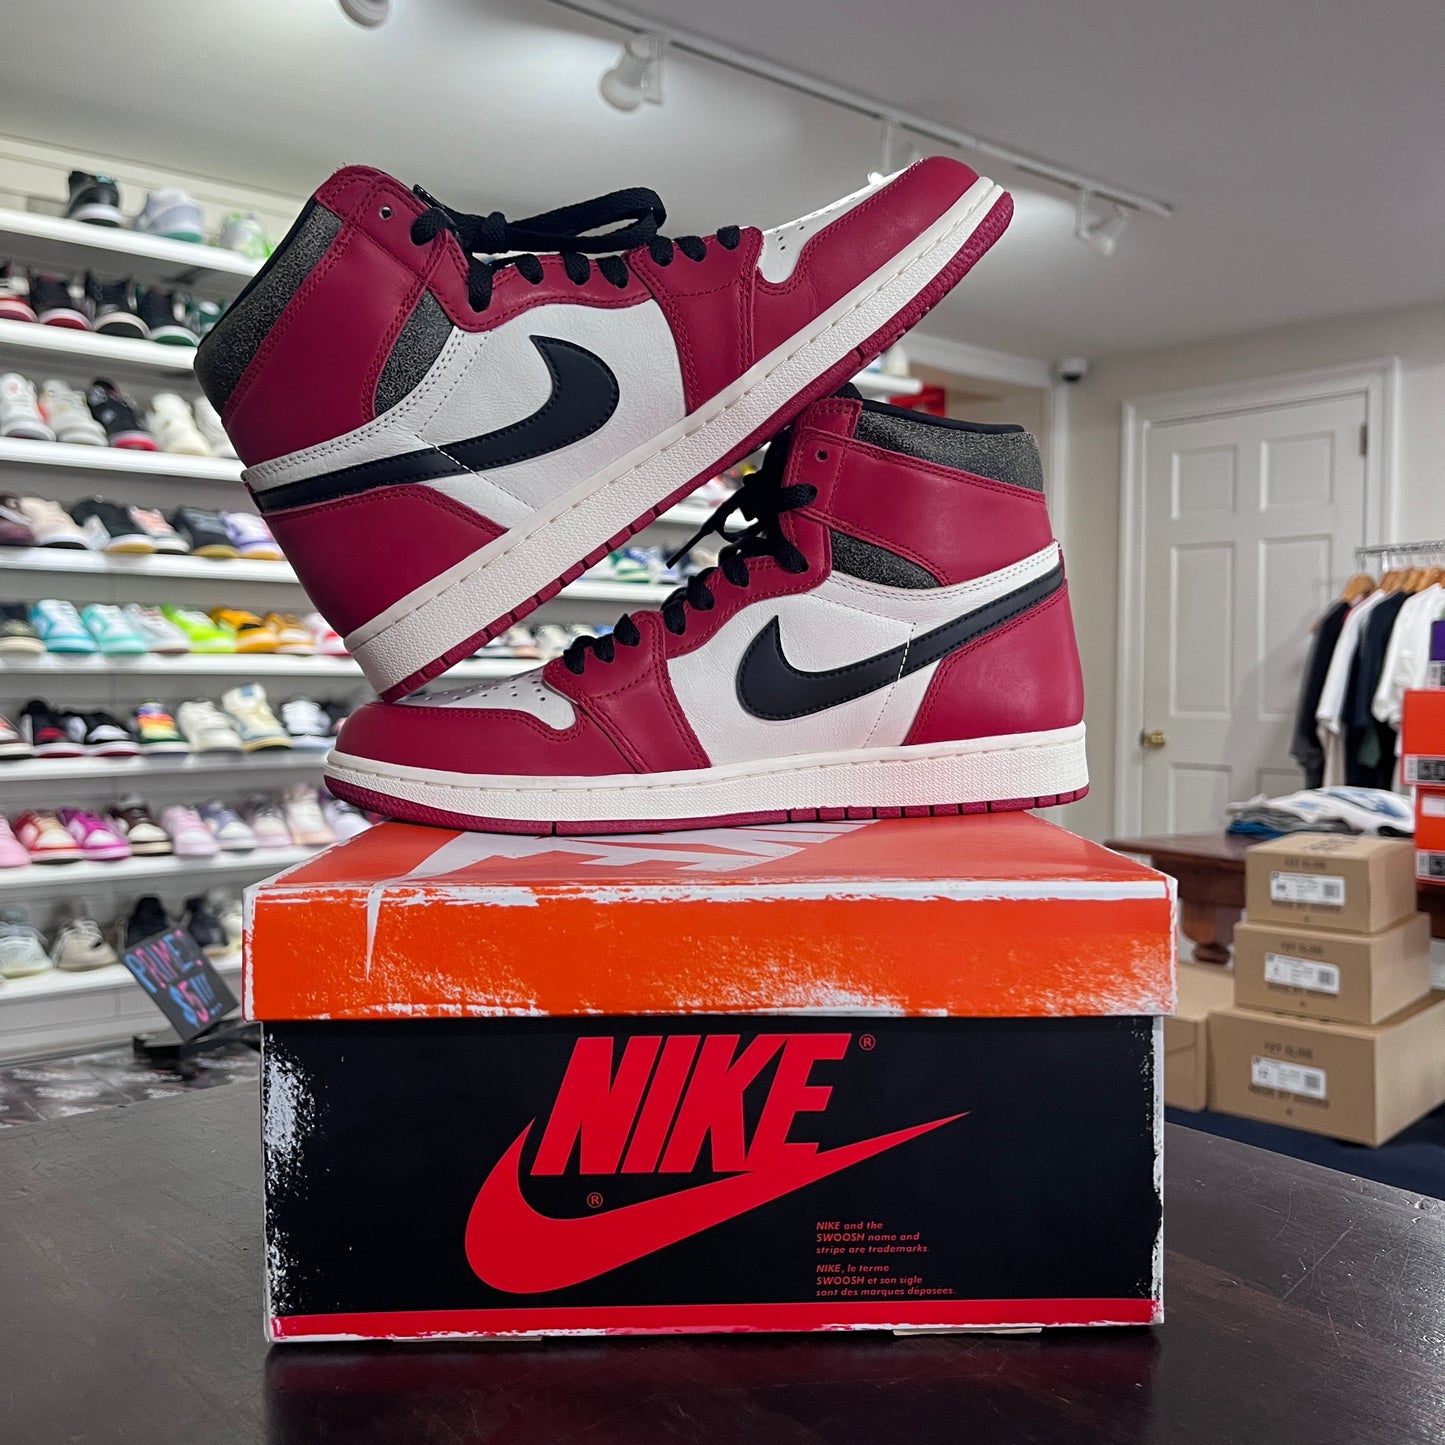 *USED* Air Jordan 1 High Lost & Found (VERY CLEAN) (SIZE 10.5)